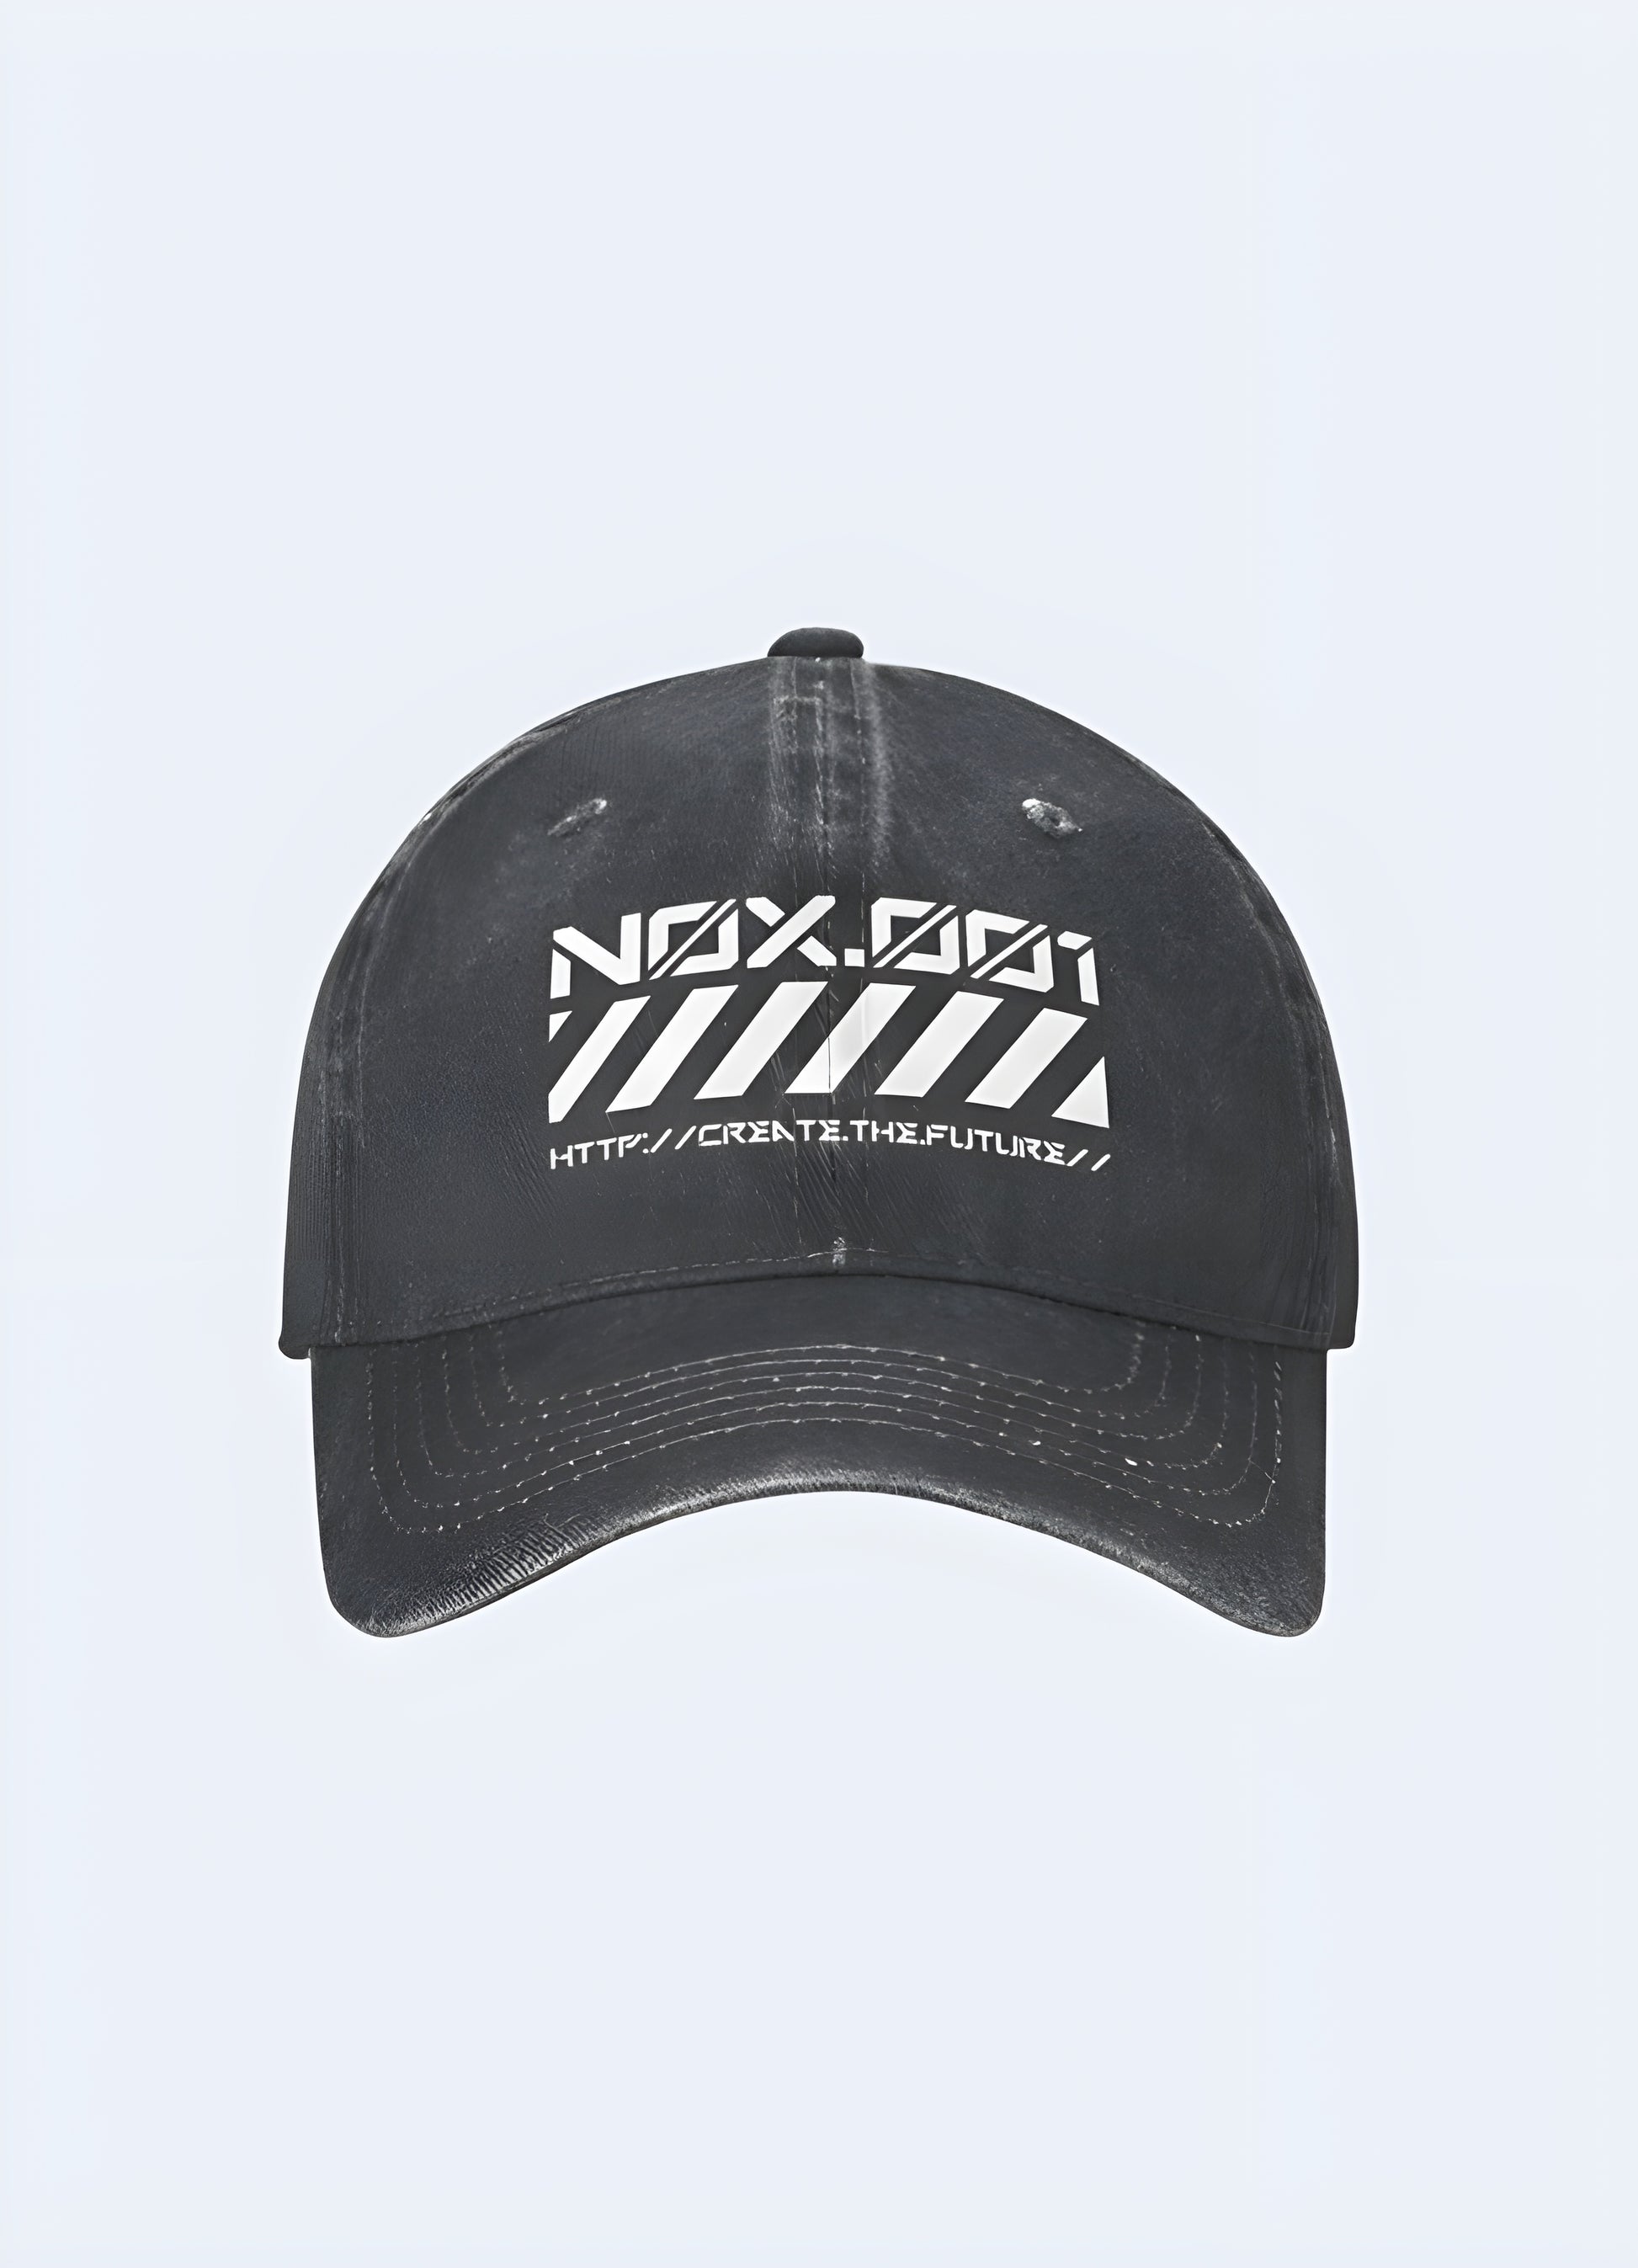 Express your cyberpunk style with this statement cap.